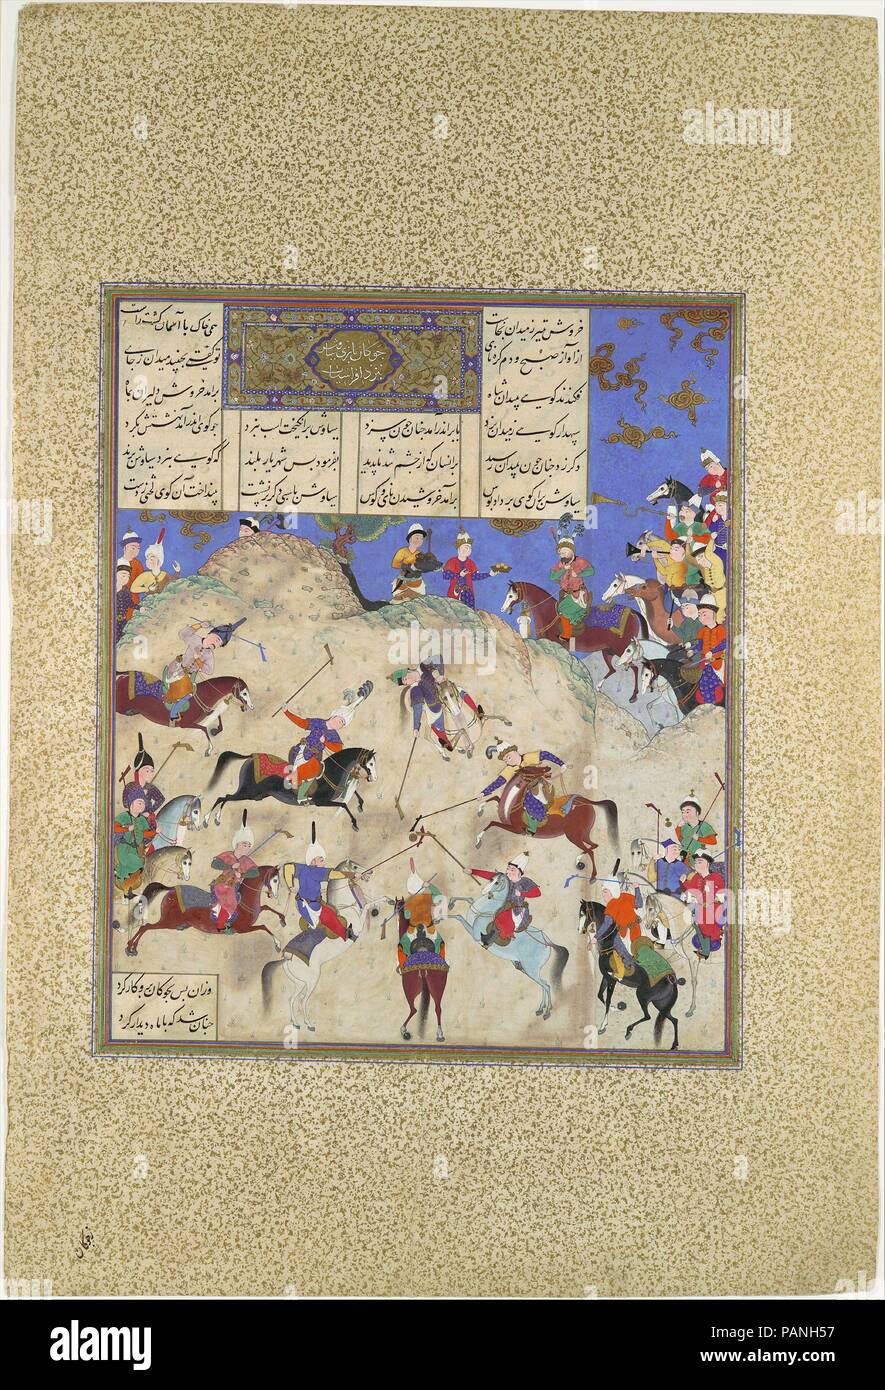 'Siyavush Plays Polo before Afrasiyab', Folio 180v from the Shahnama (Book of Kings) of Shah Tahmasp. Artist: Painting attributed to Qasim ibn 'Ali (active ca. 1525-60). Author: Abu'l Qasim Firdausi (935-1020). Dimensions: Painting: H. 11 3/16 in. (28.4 cm)  W. 9 5/16 in. (23.7 cm)  Entire Page: H. 18 5/8 in. (47.3 cm)  W. 12 9/16 in. (31.9 cm). Workshop director: Mir Musavvir (active 1525-60). Date: ca. 1525-30.  The Turanian king Afrasiyab suggested a game of polo and Siyavush accepted, requesting, however, that he be allowed Iranian players for his team, as Turanians would not play their ha Stock Photo